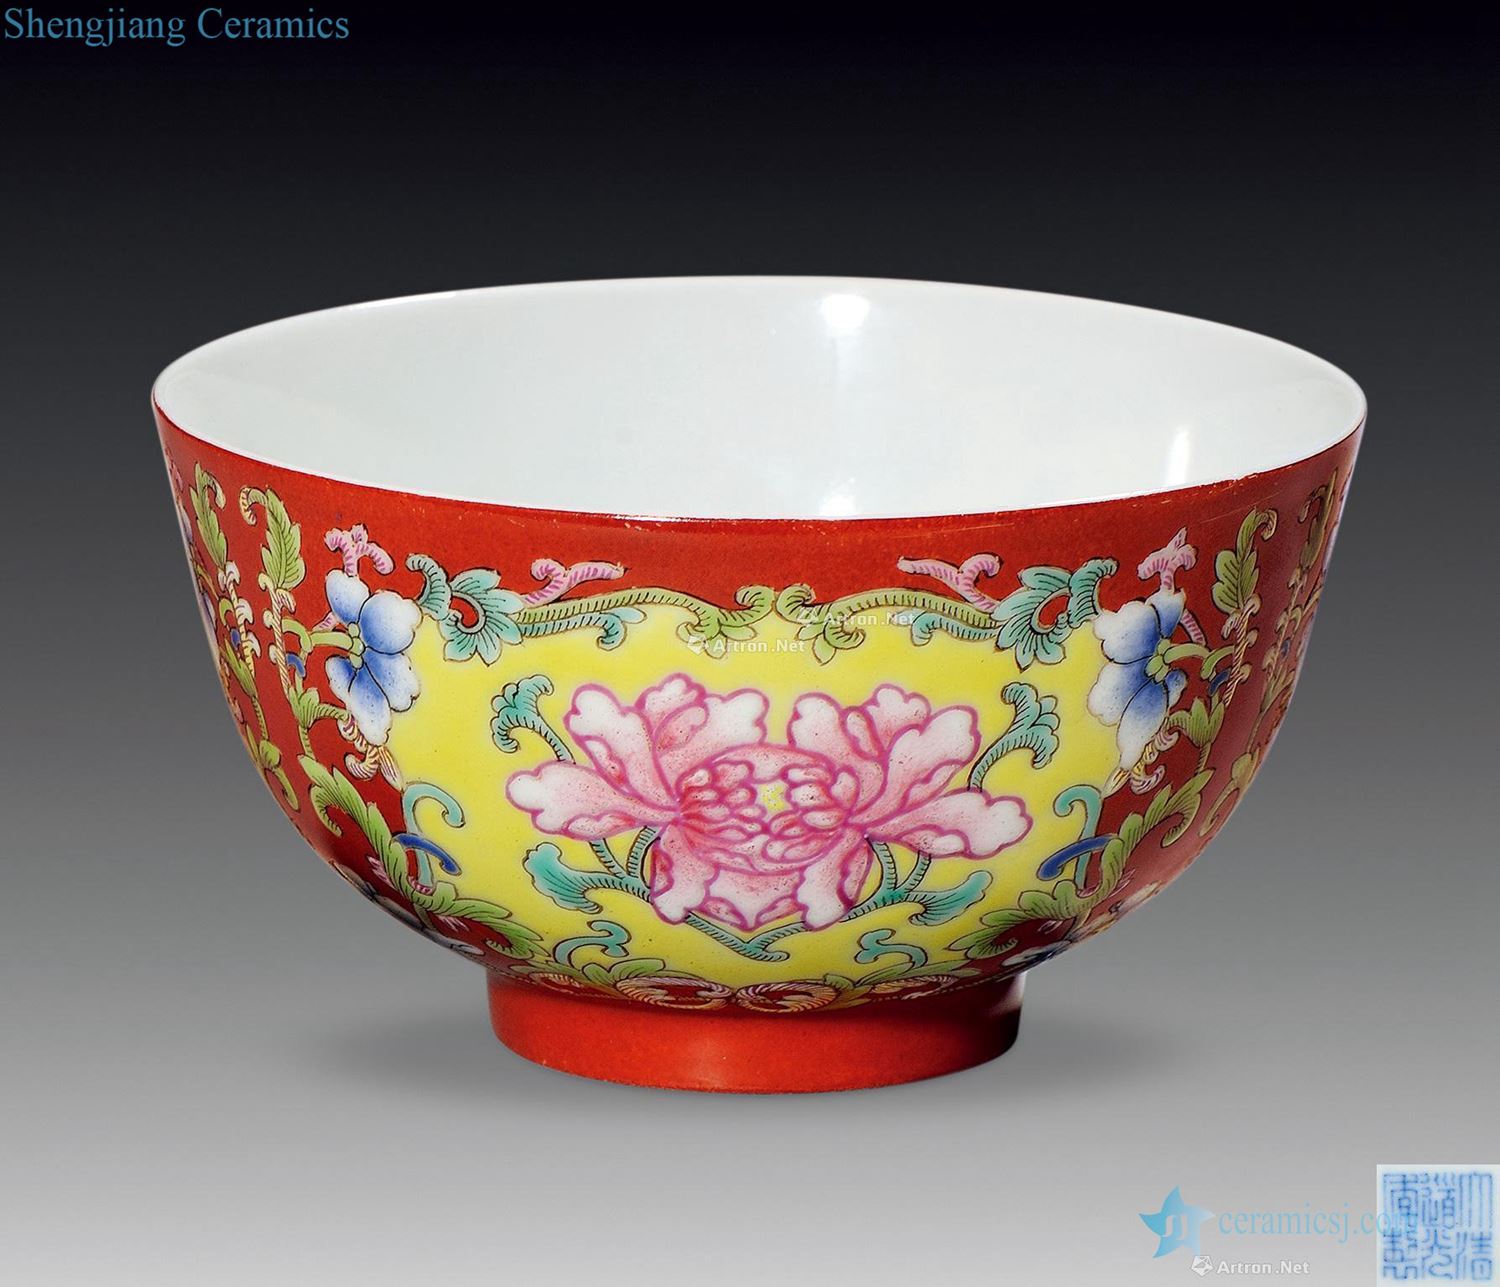 Qing daoguang coral red famille rose medallion peony green-splashed bowls